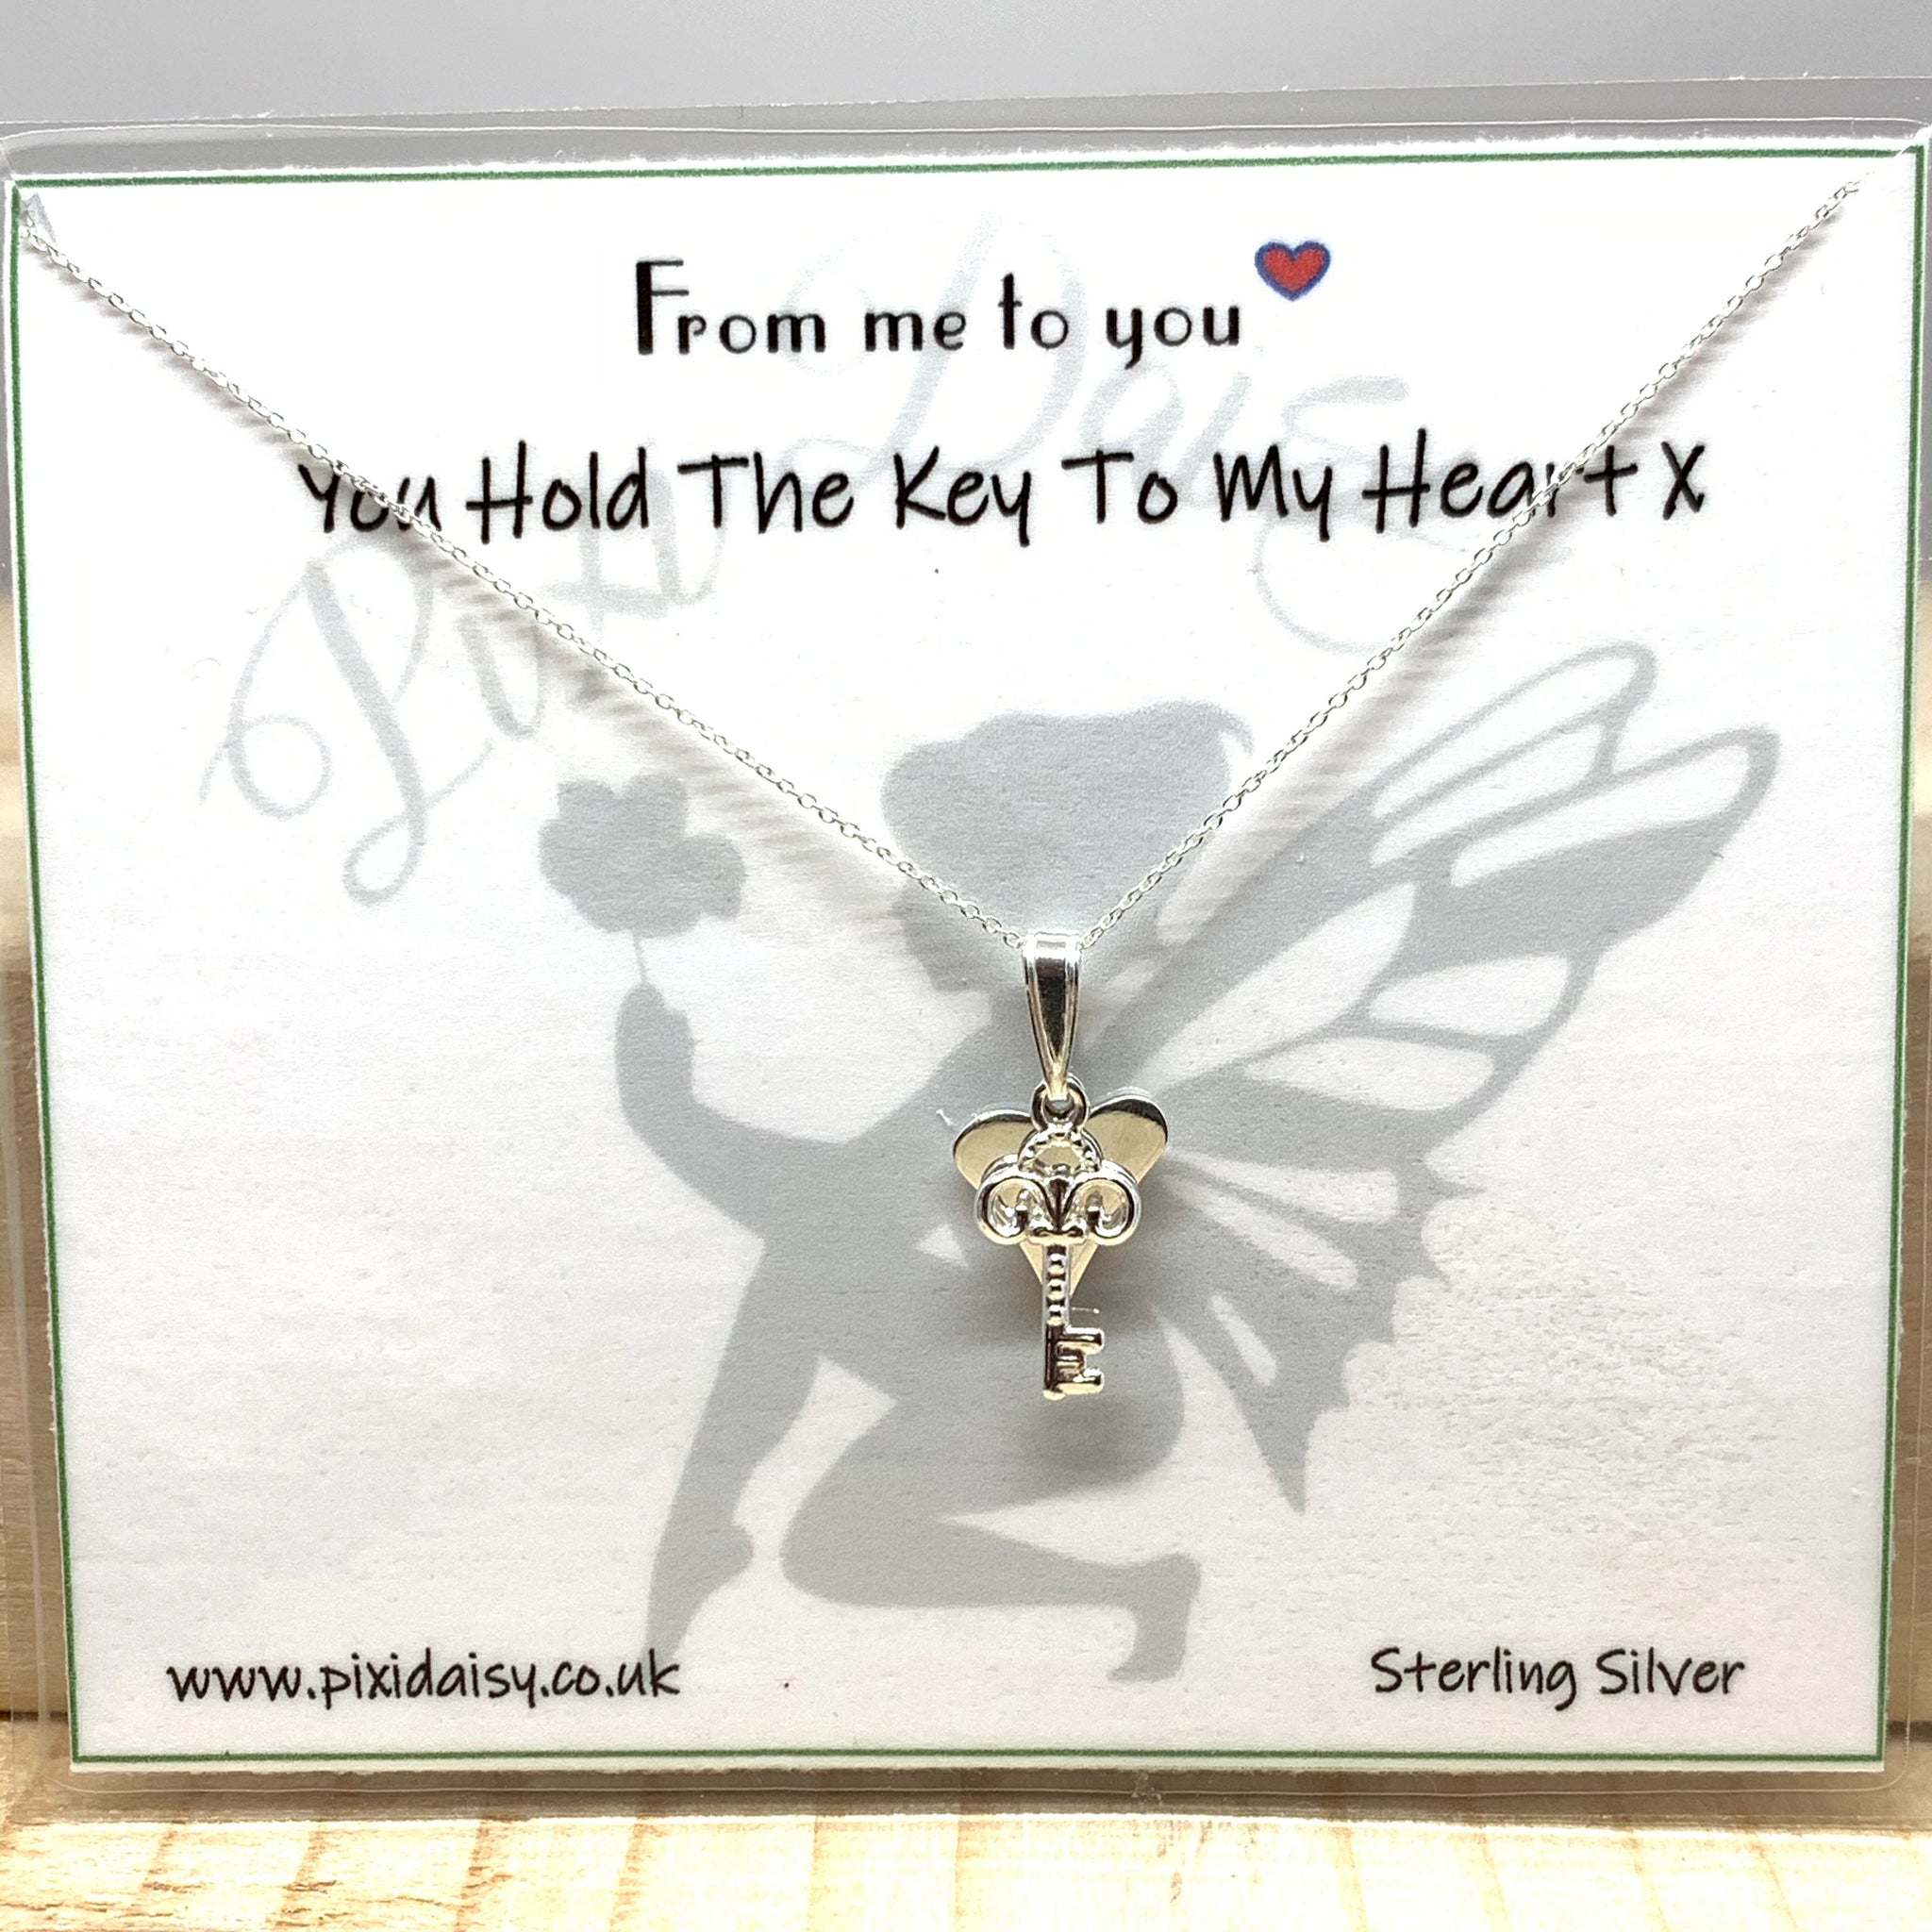 You Hold the Key to my Heart Sentiment from Pixi Daisy